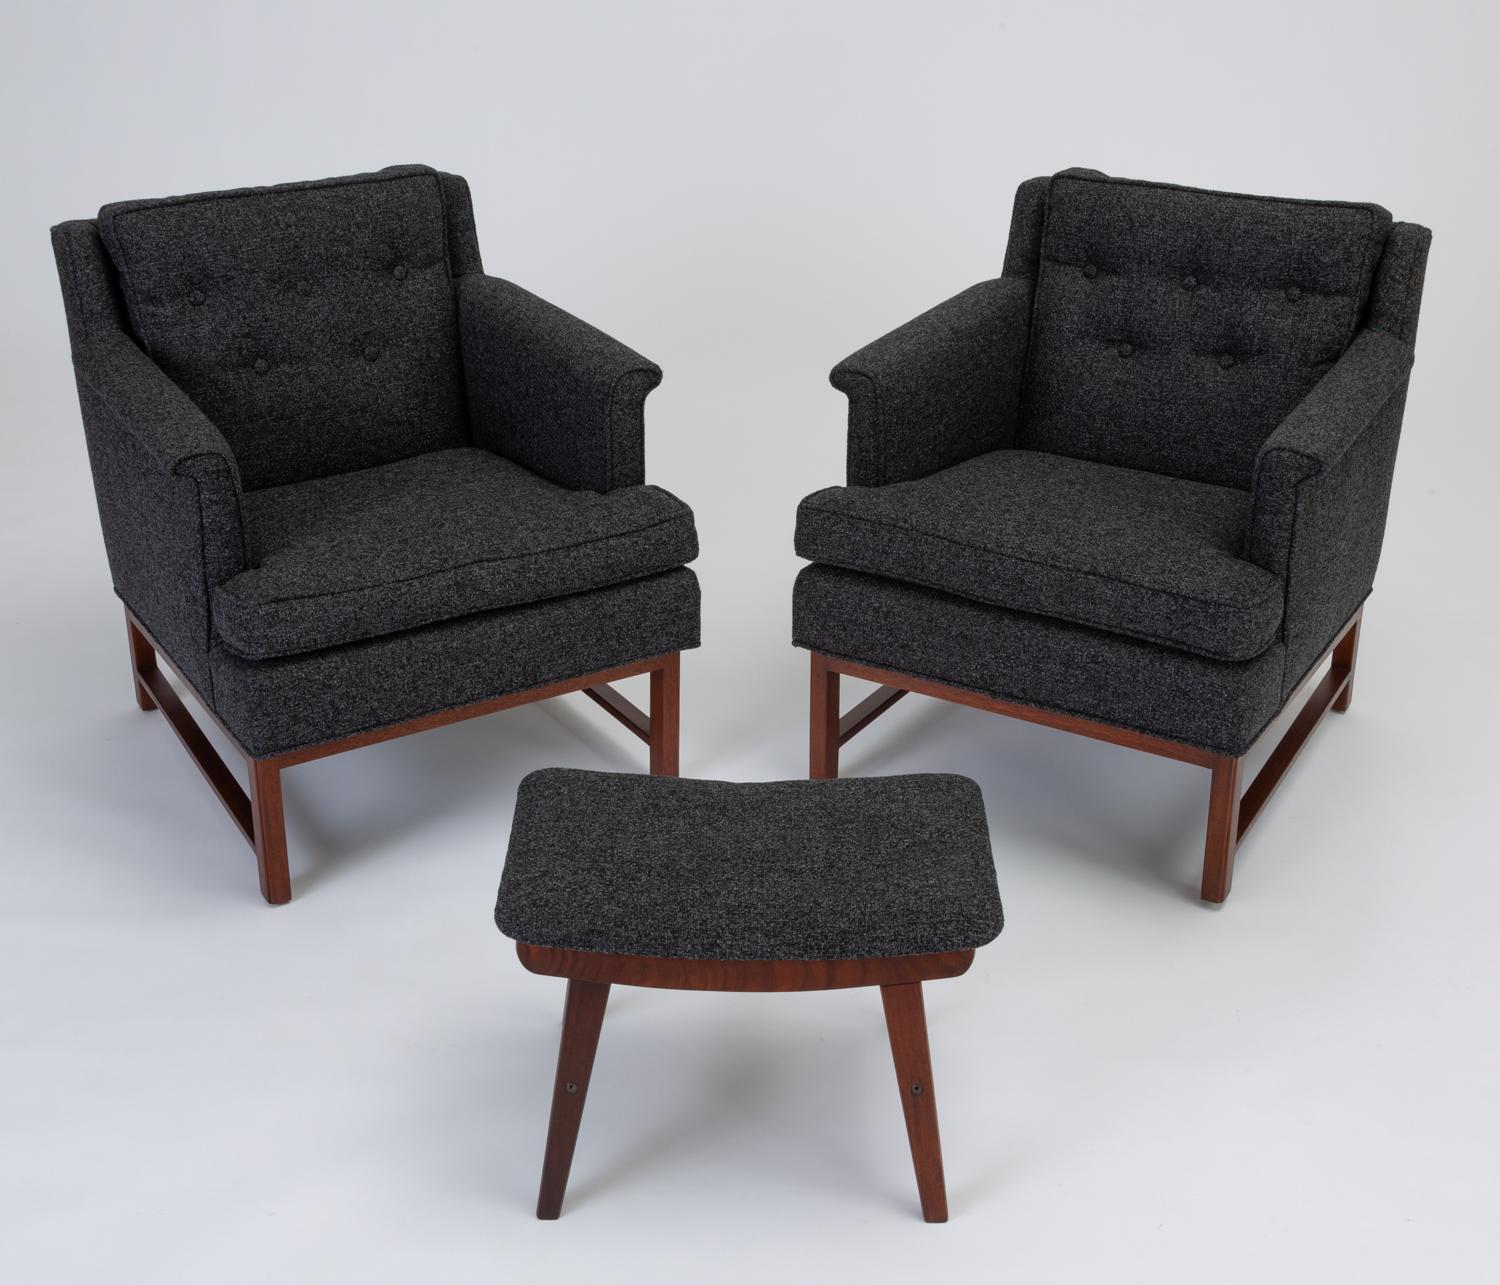 Stained Pair of Petite Lounge Chairs by Edward Wormley for Dunbar